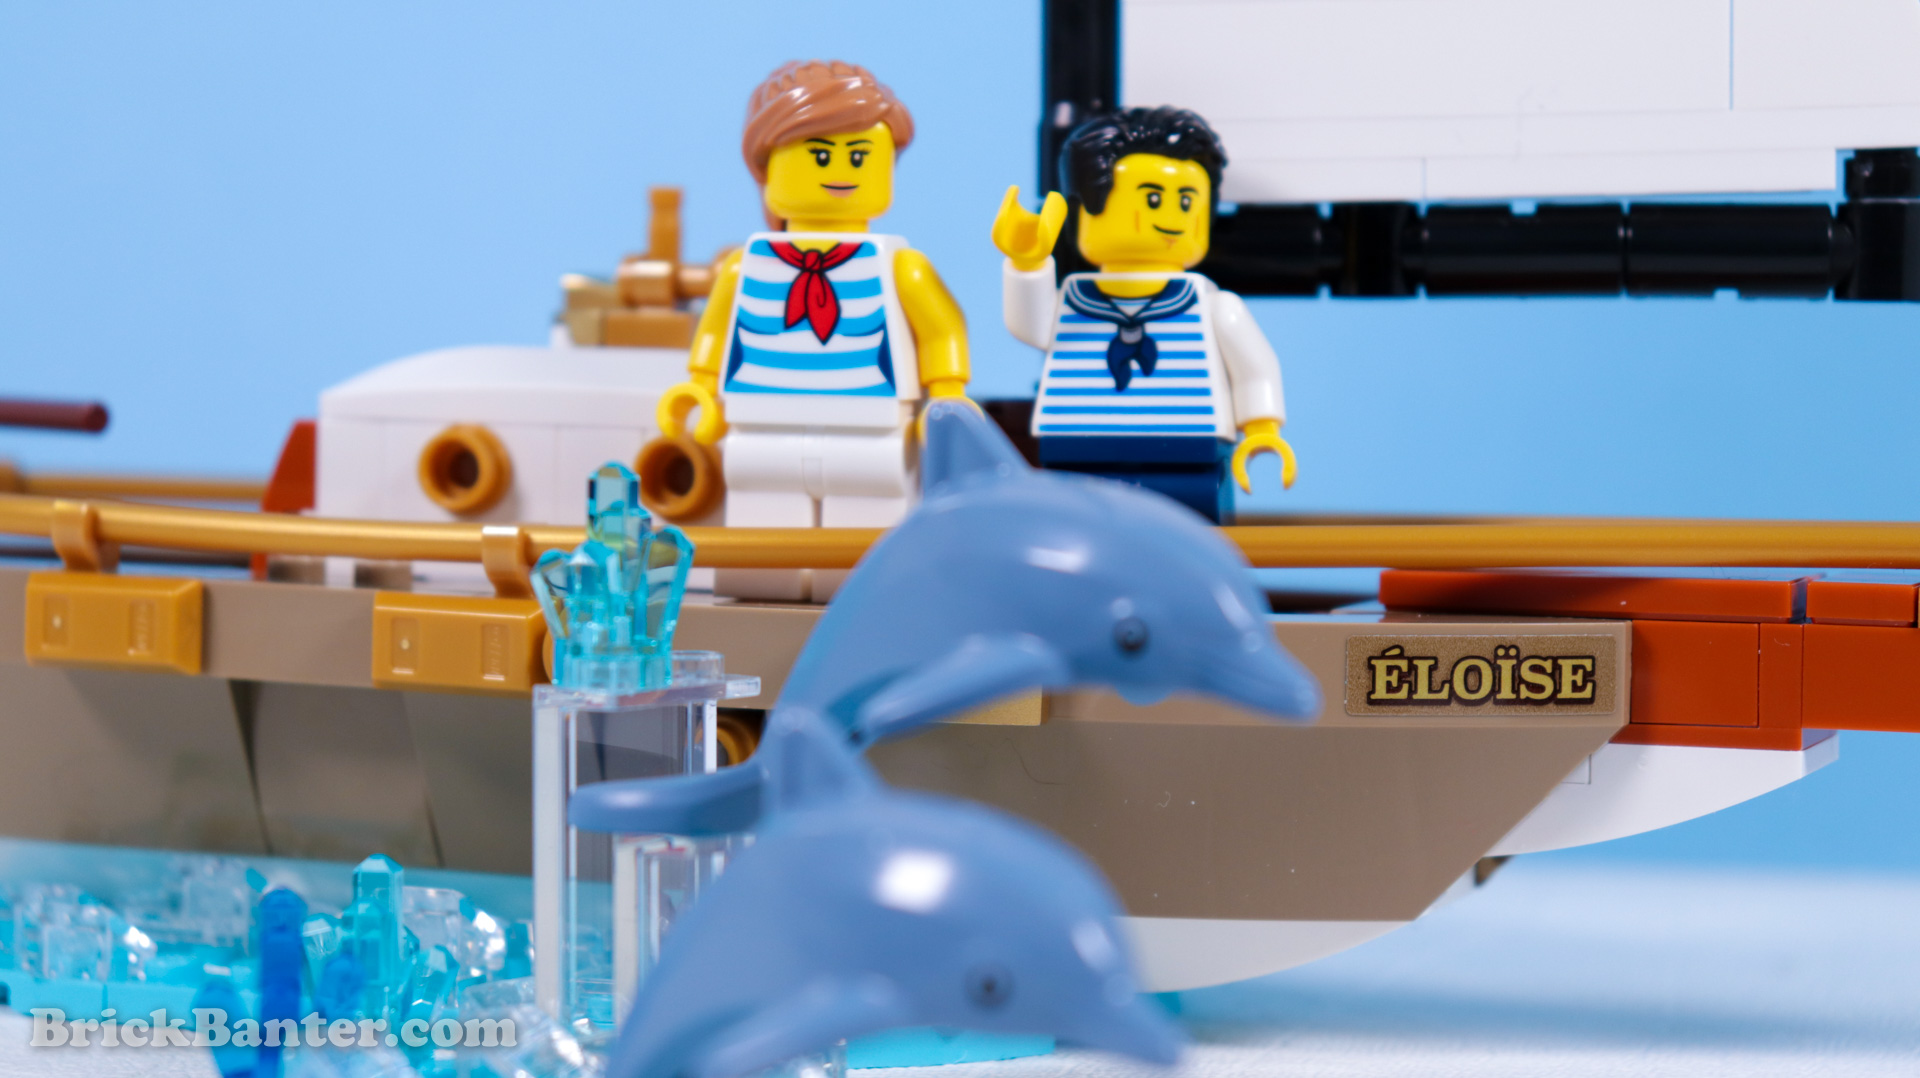 LEGO 40487 – LEGO Ideas Gift With Purchase “Sailing Adventures